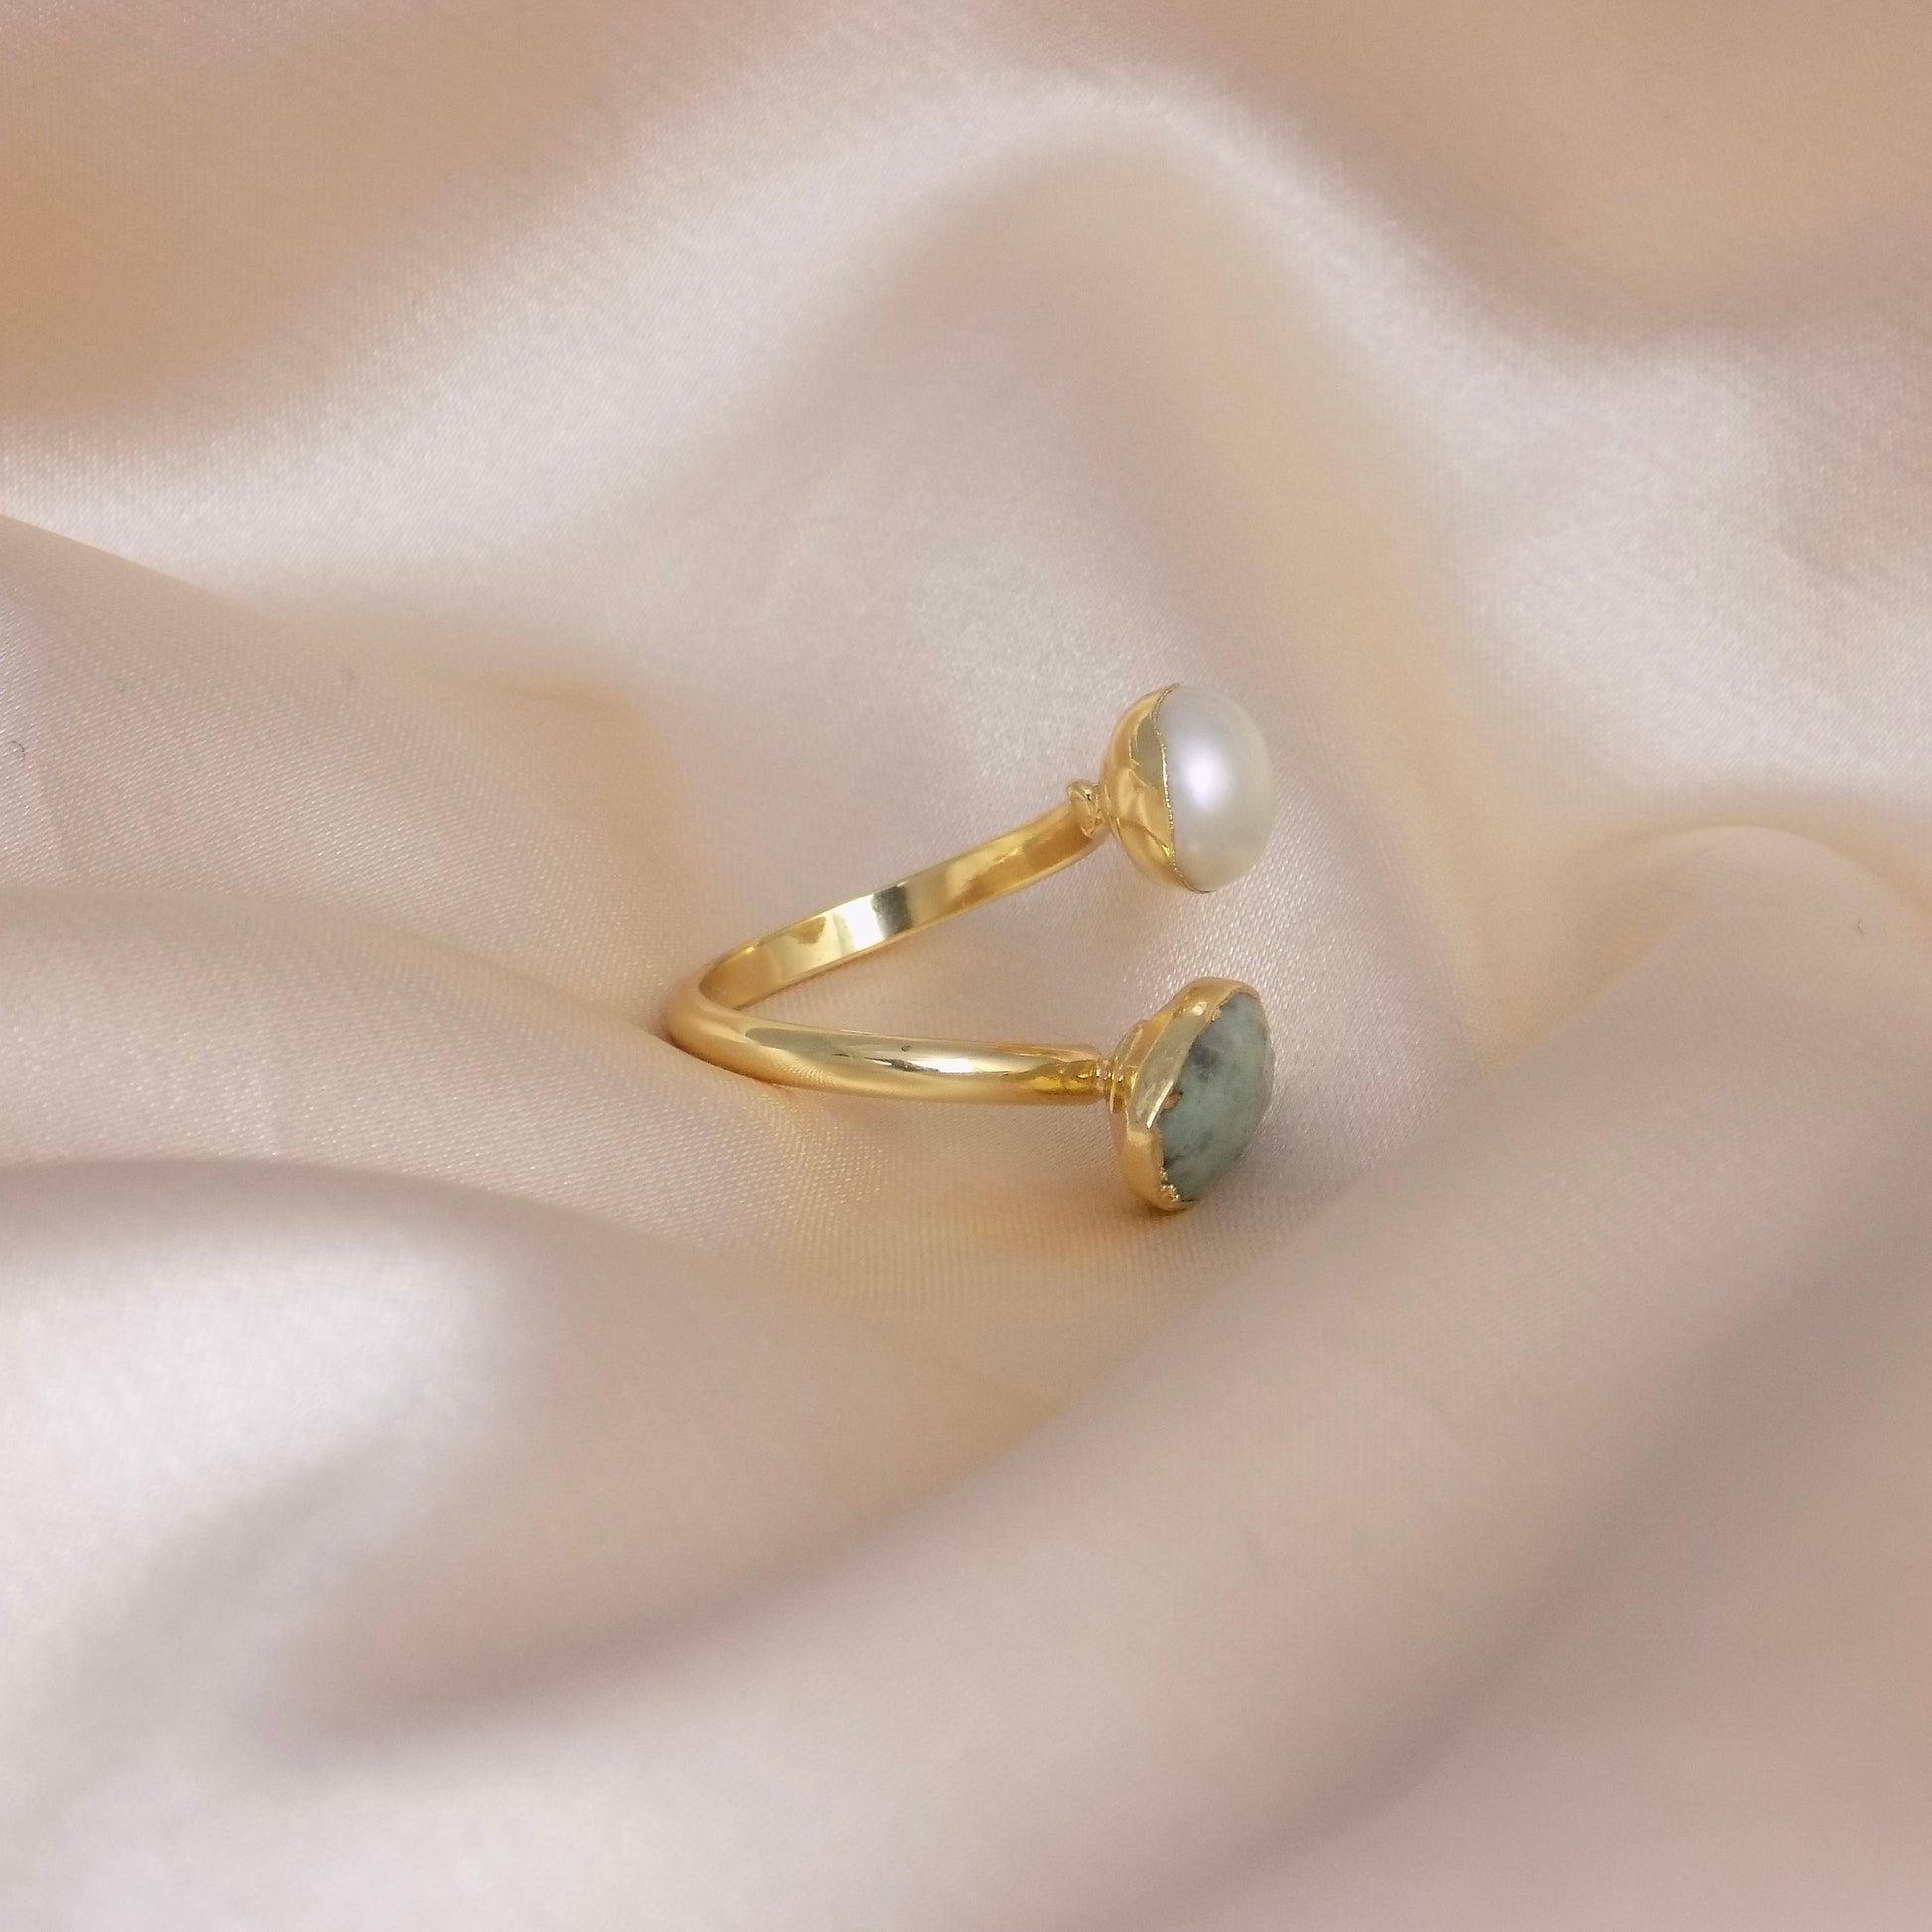 Green Jasper Ring Adjustable, Freshwater Pearl Ring Gold Plated, Raw Crystals Dual Gemstone Gold, Unique Gifts For Her, M6-754